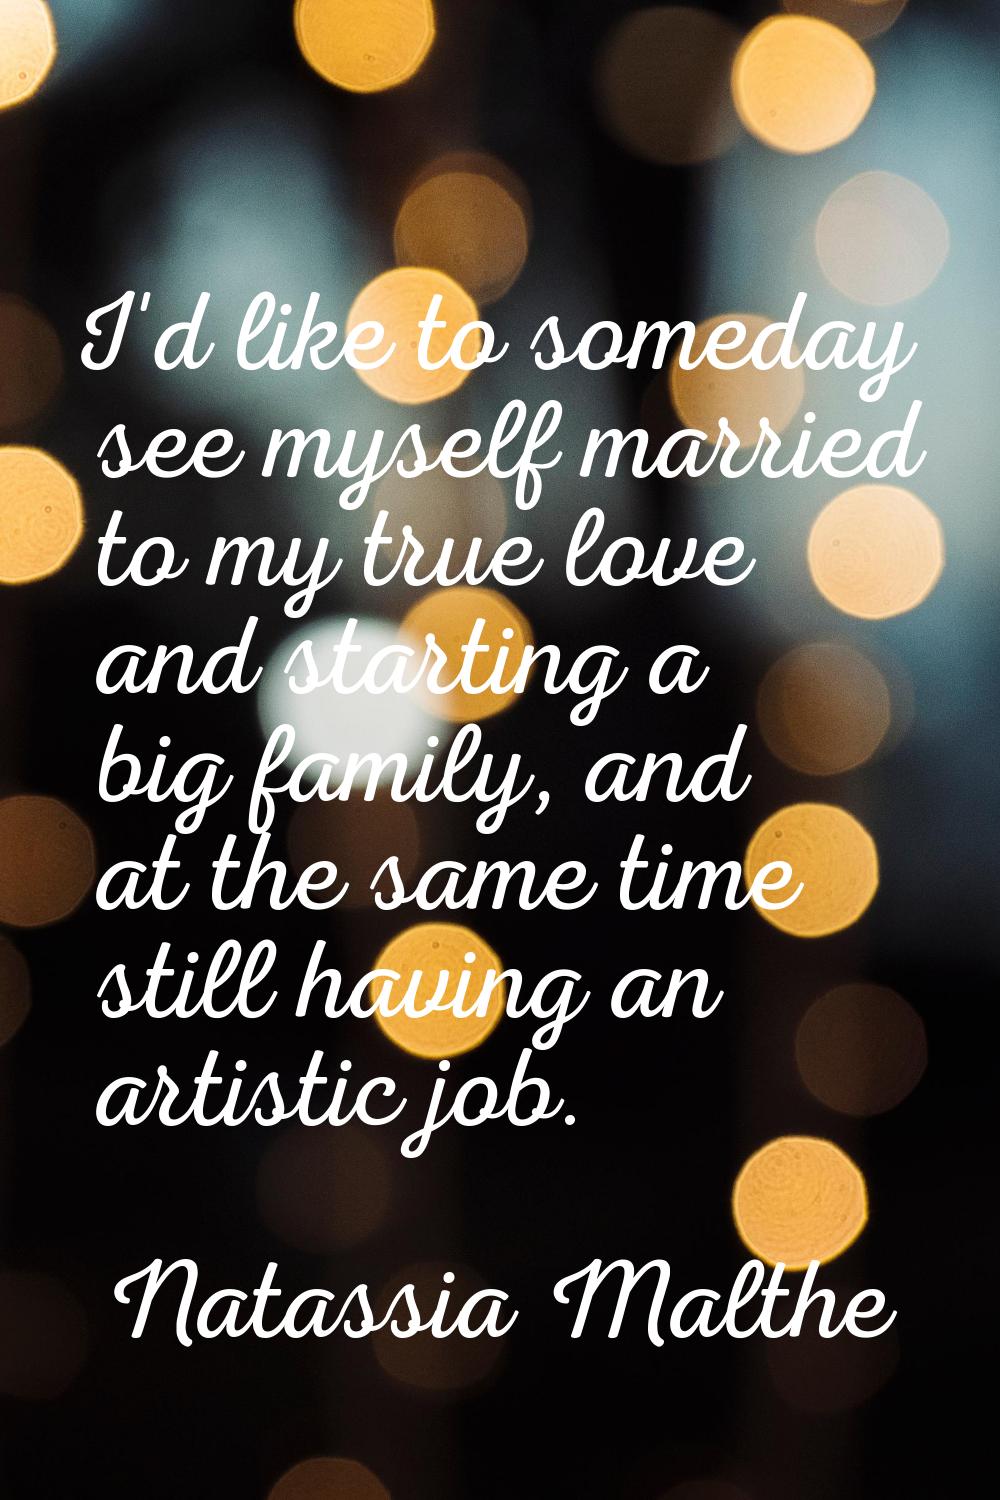 I'd like to someday see myself married to my true love and starting a big family, and at the same t